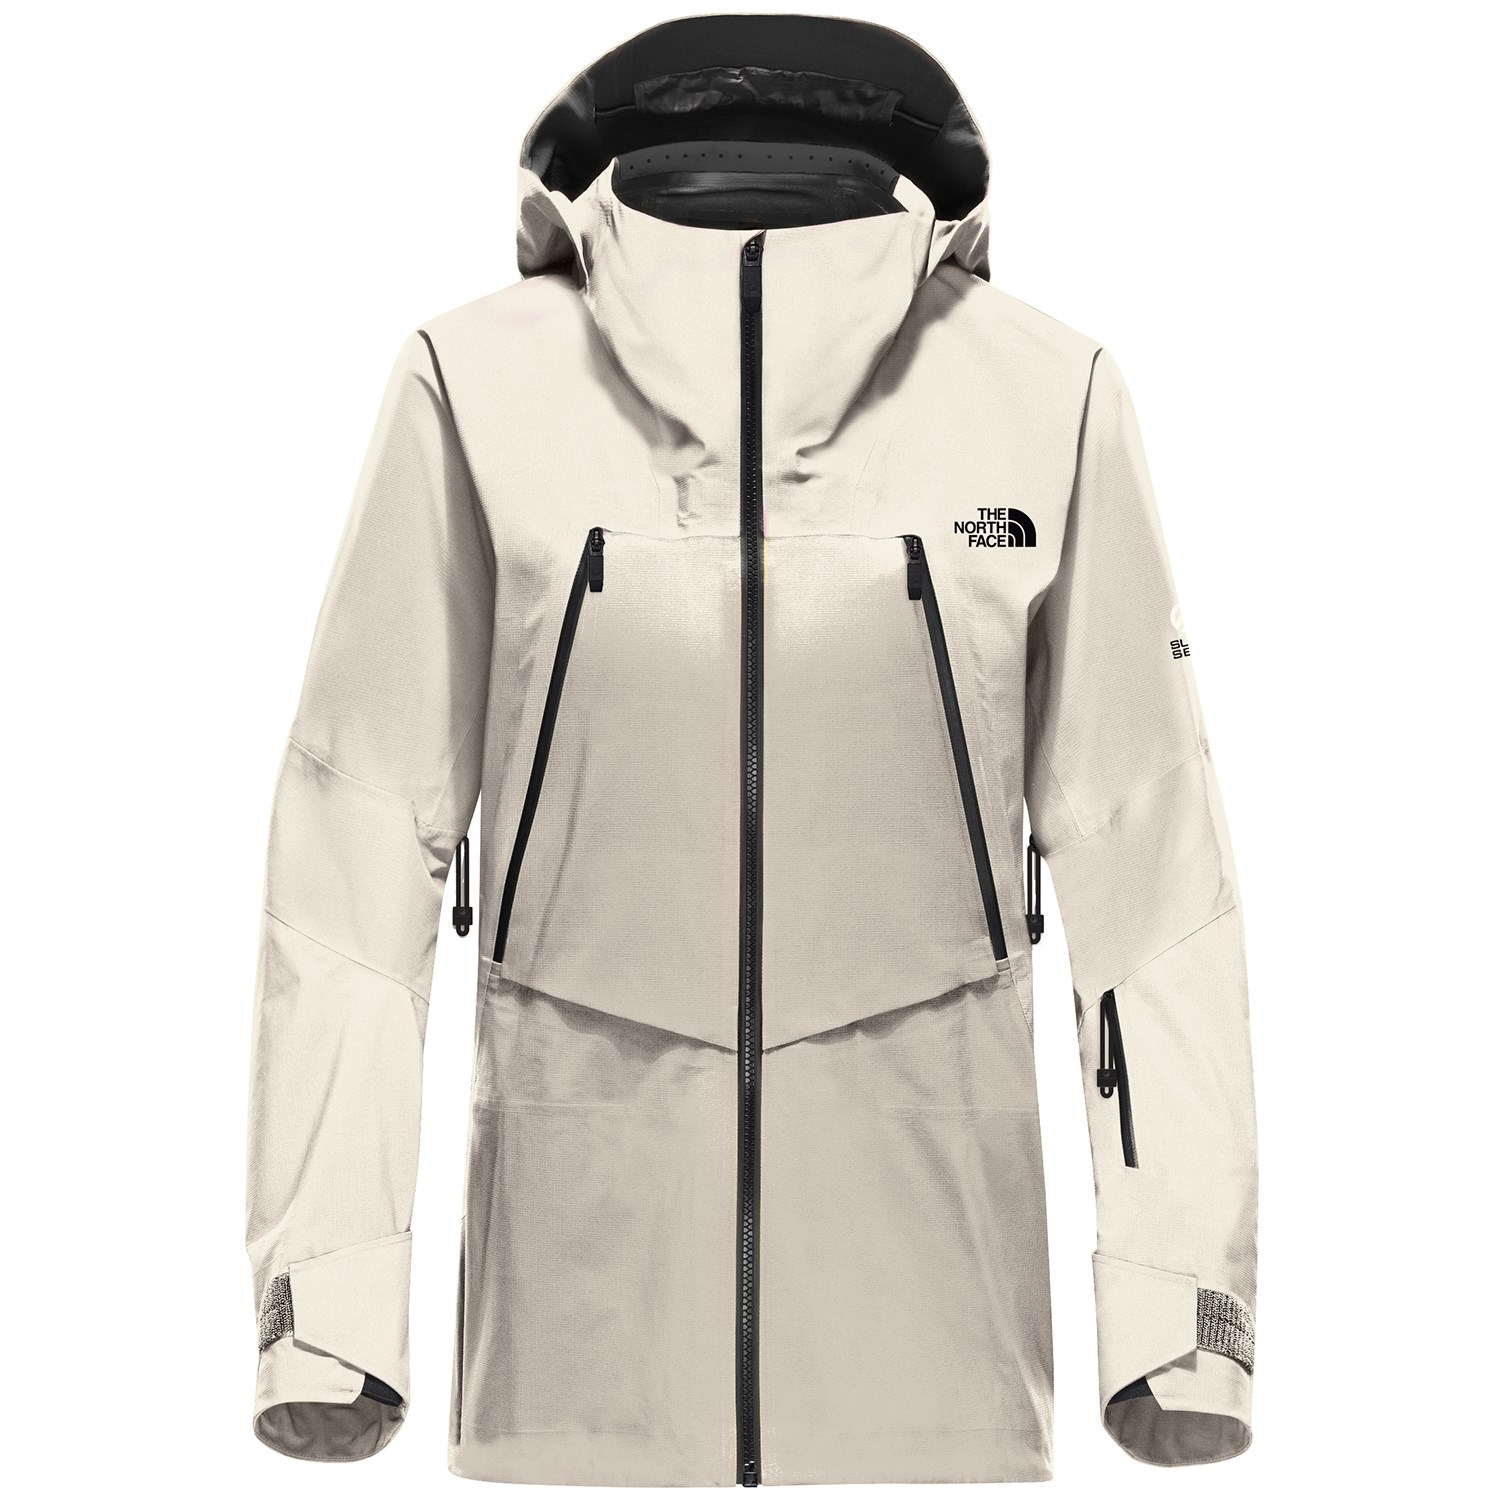 north face jacket triclimate sale 